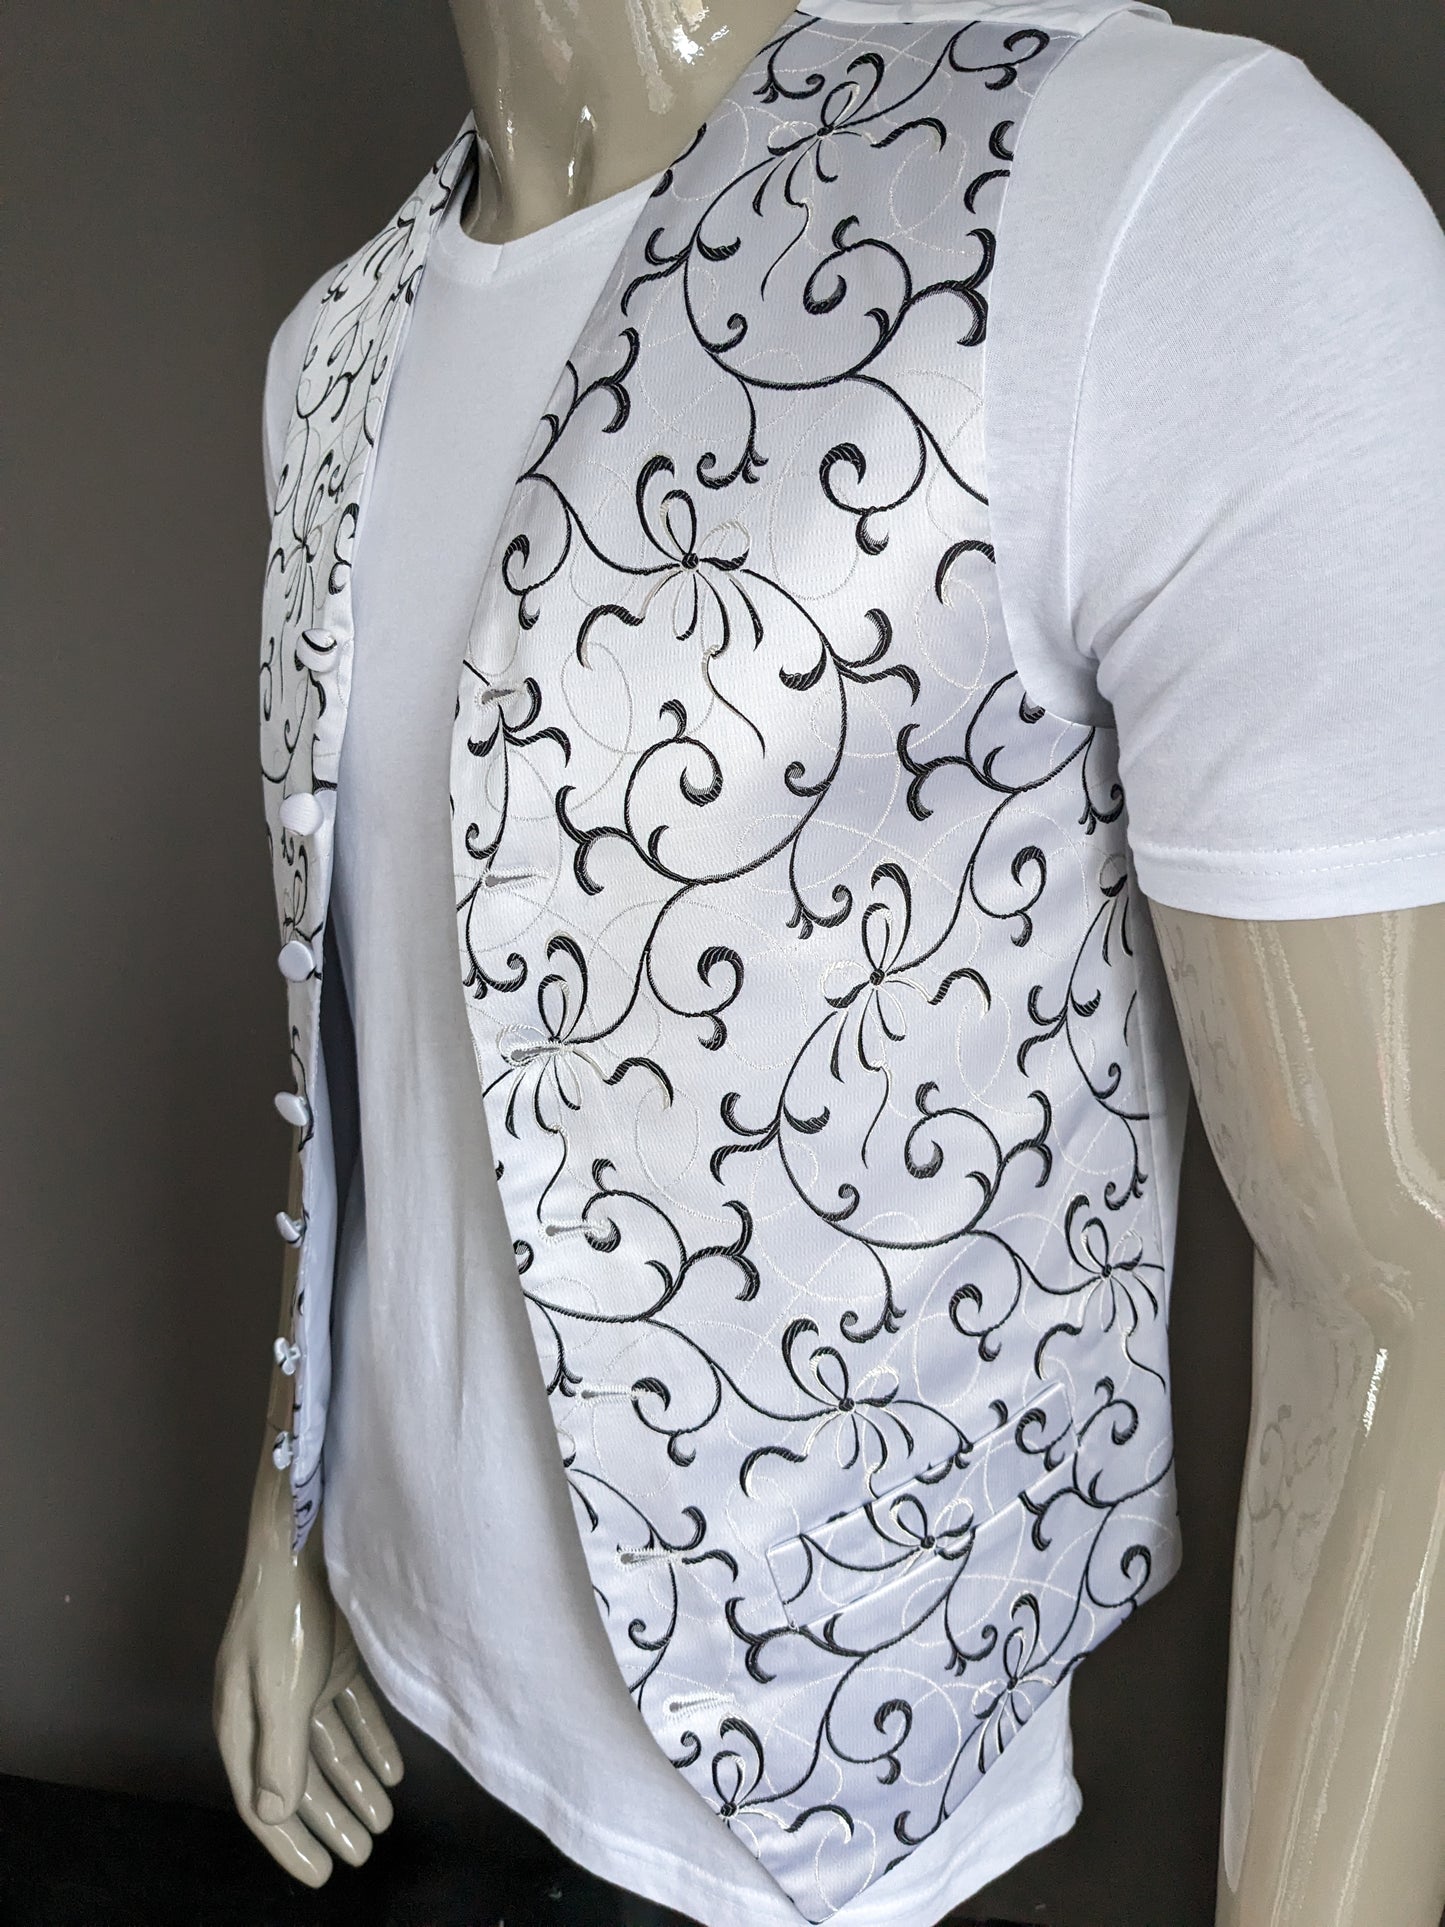 FH waistcoat. Light lilac colored with white black motif. Size M.